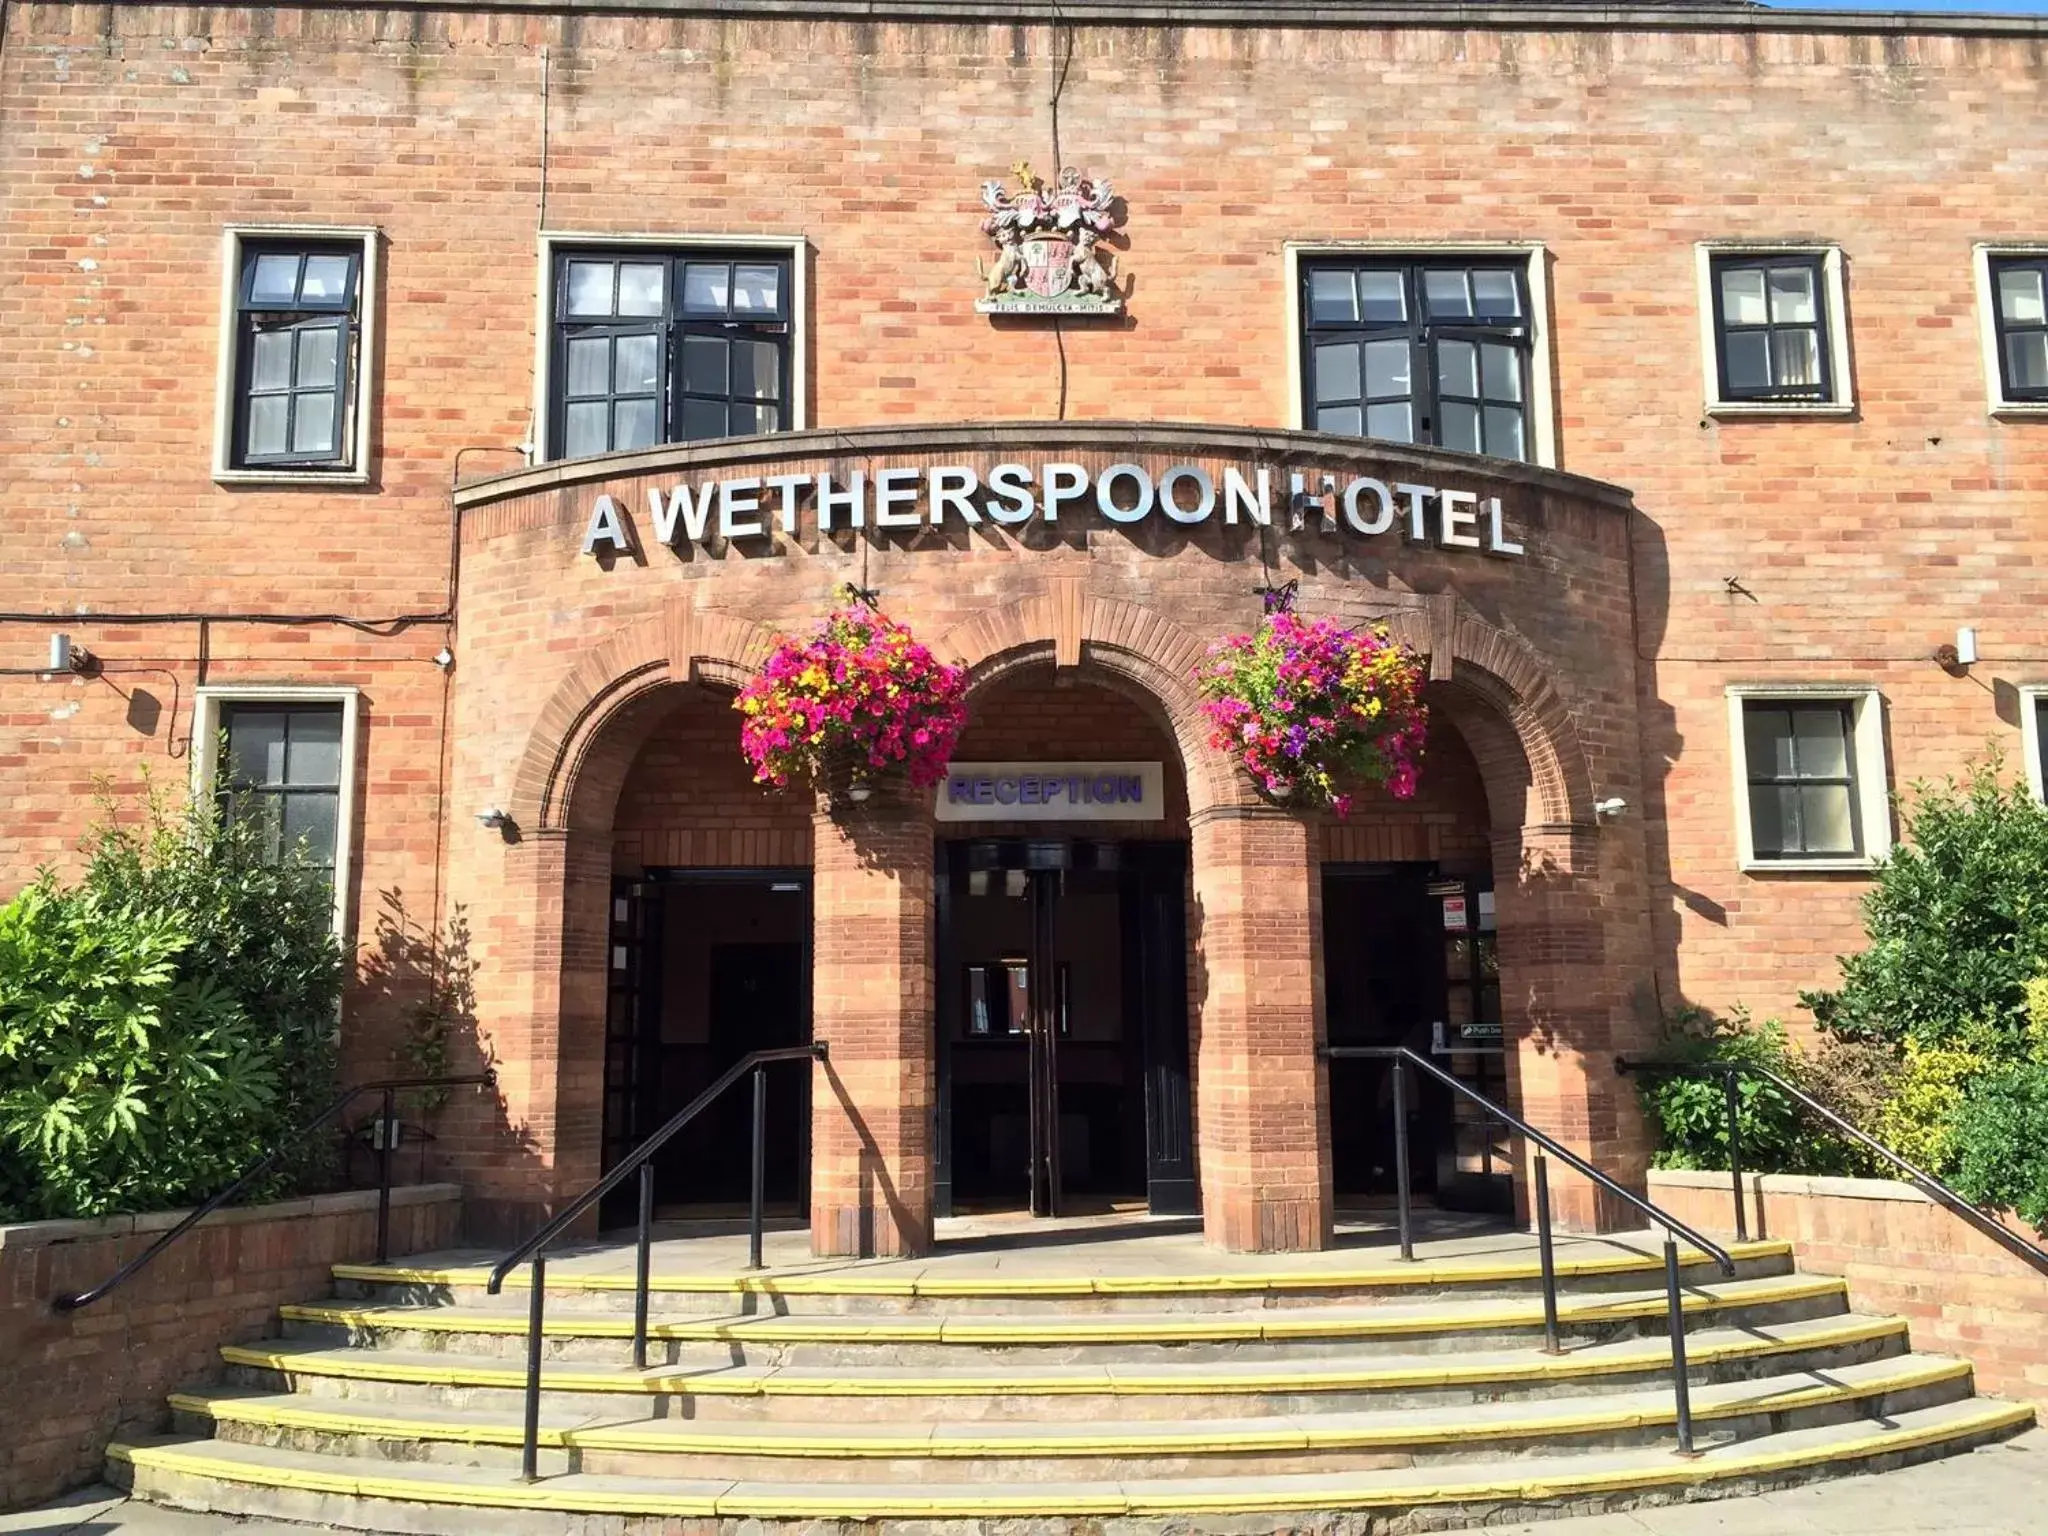 Facade/entrance in The Brocket Arms Wetherspoon